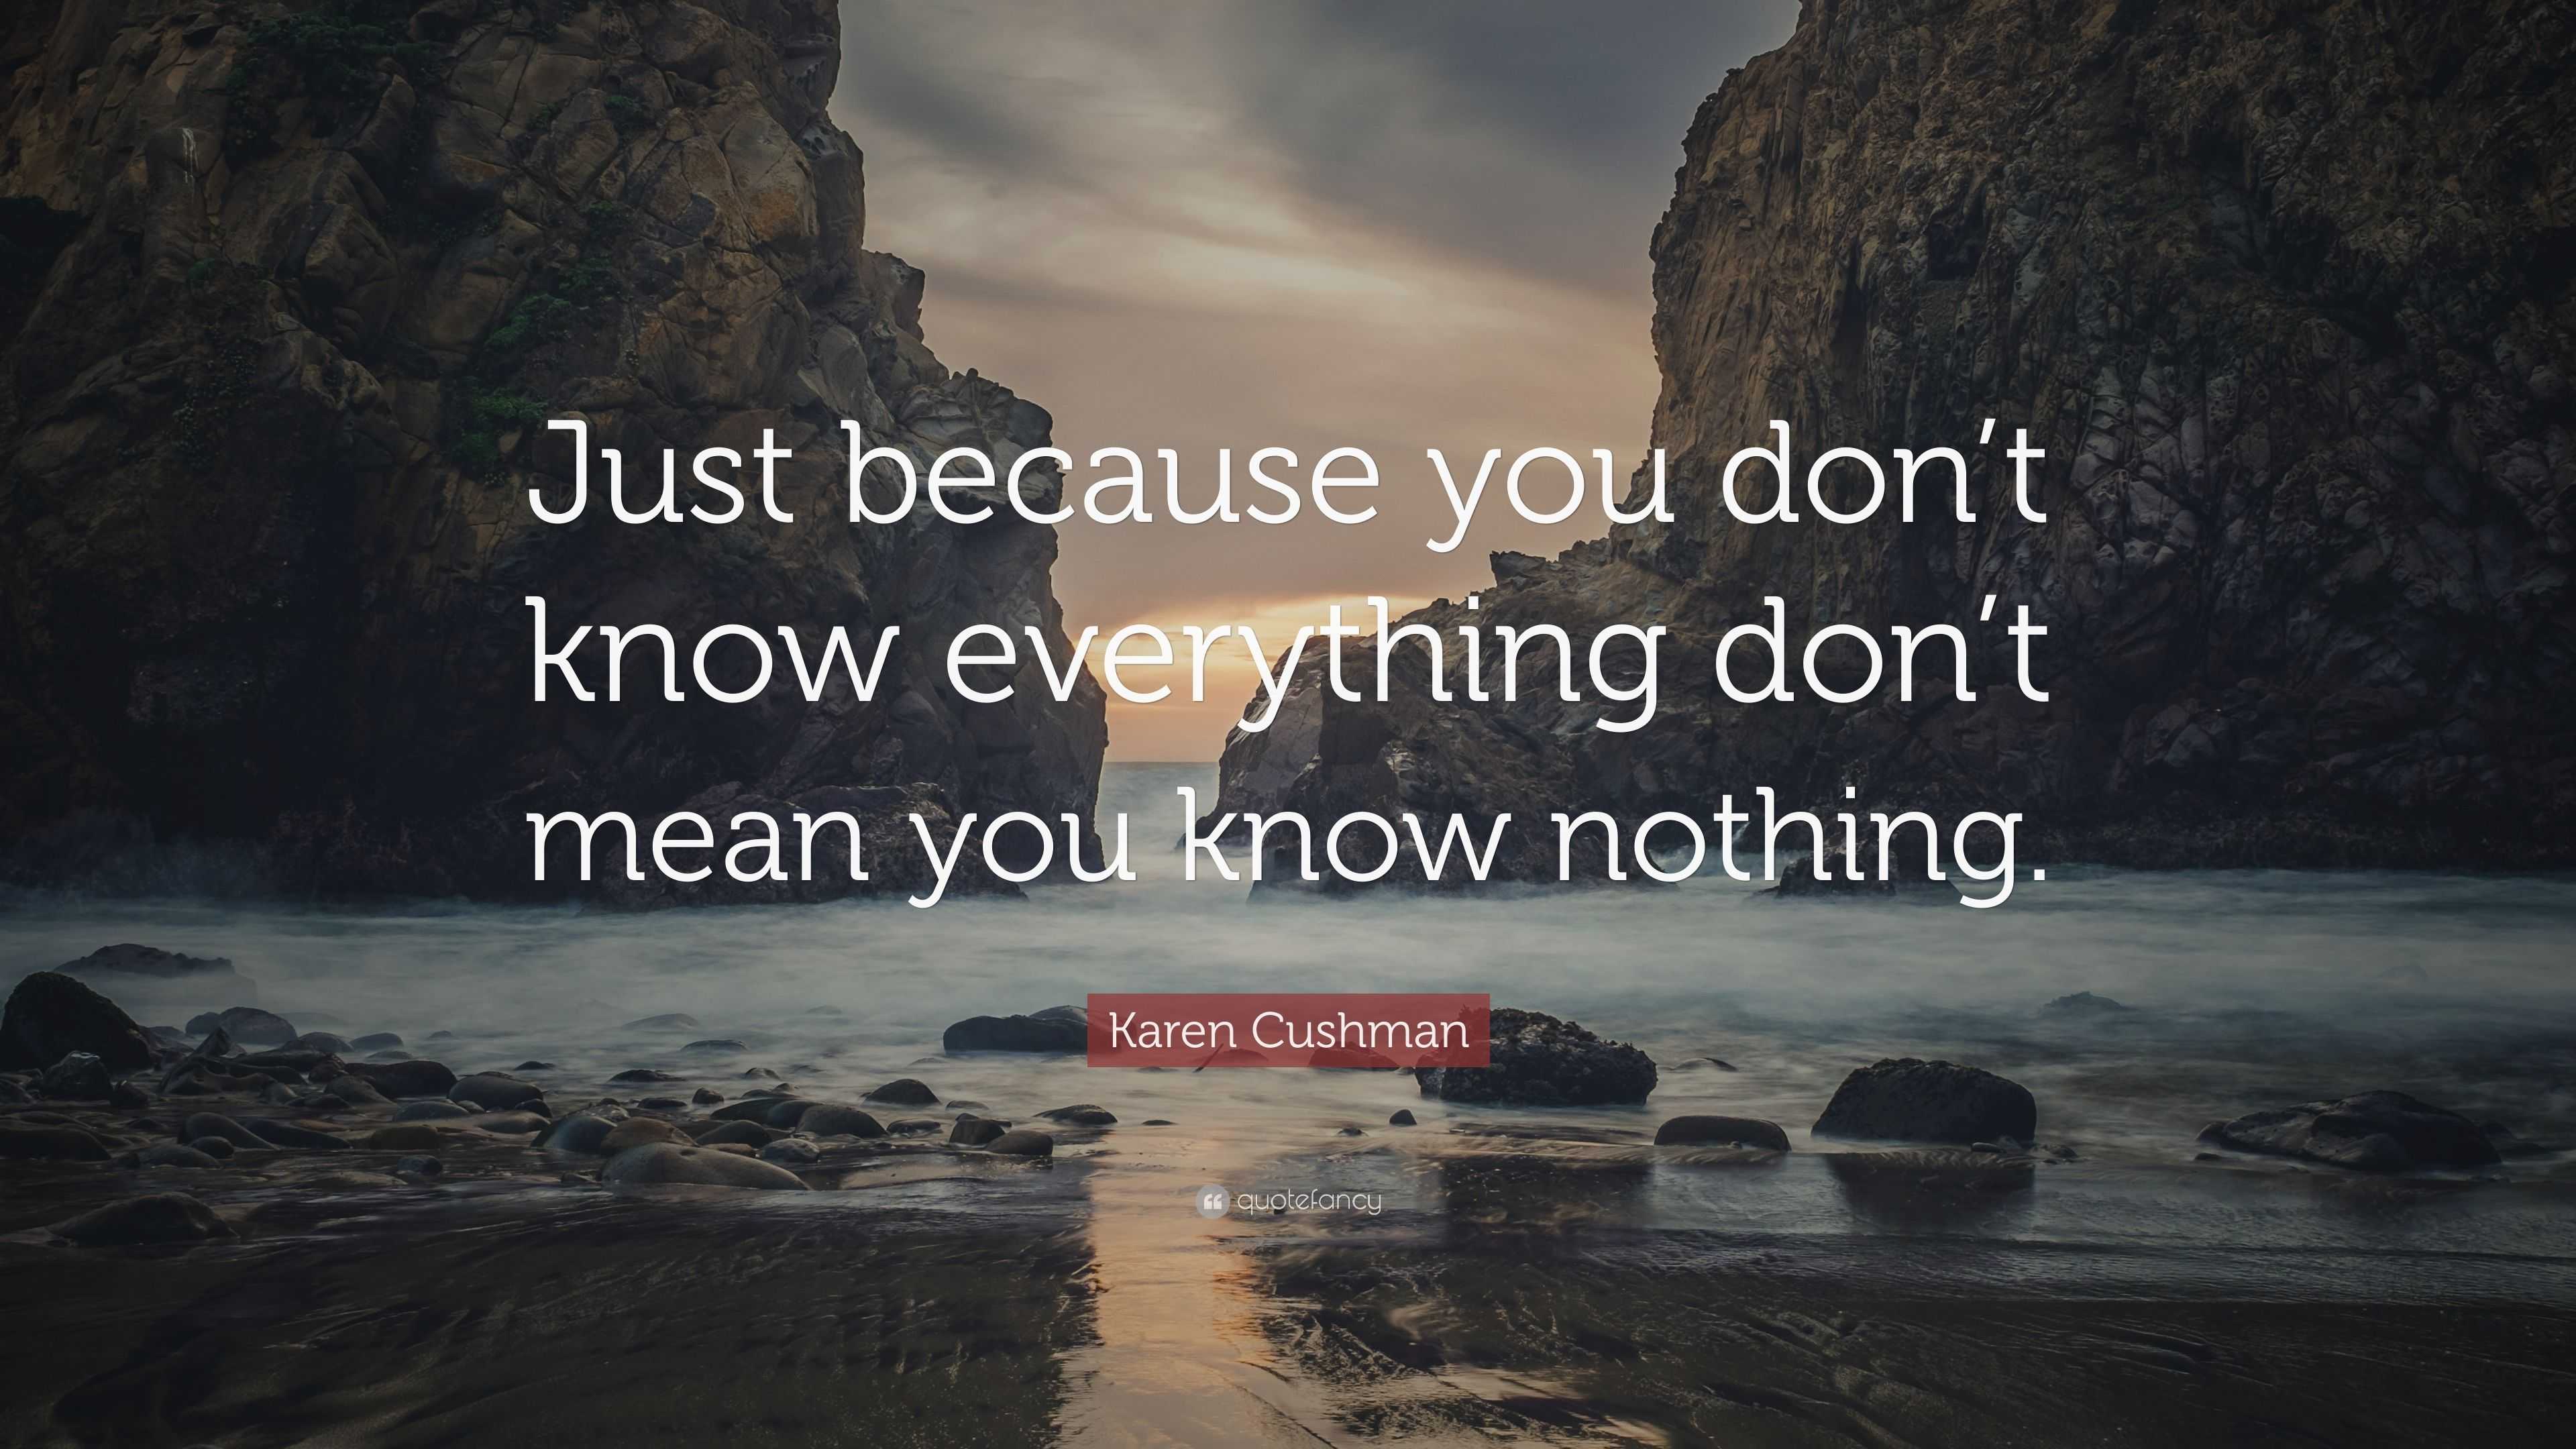 Karen Cushman Quote: “Just because you don’t know everything don’t mean ...